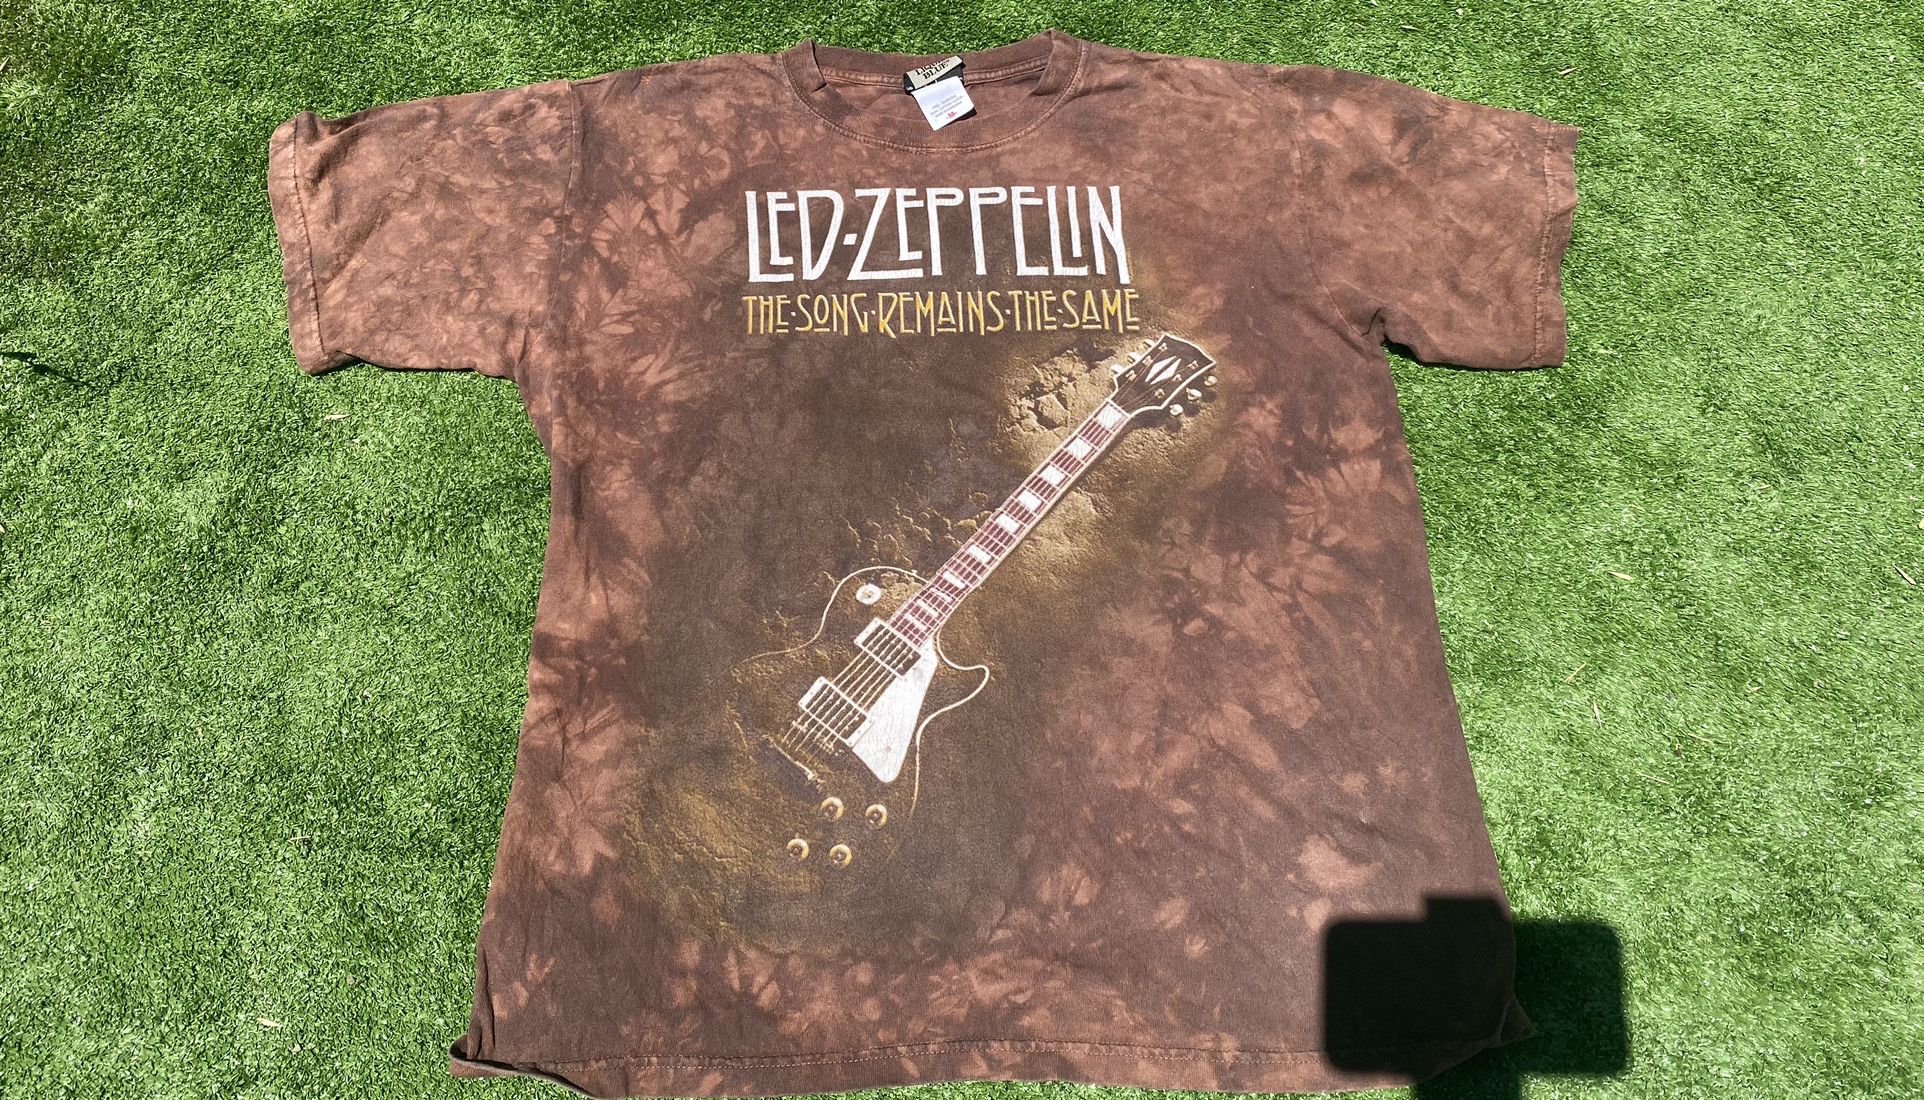 LED-ZEPPELIN VINTAGE T-SHIRT  (Very GOOD CONDITION) 